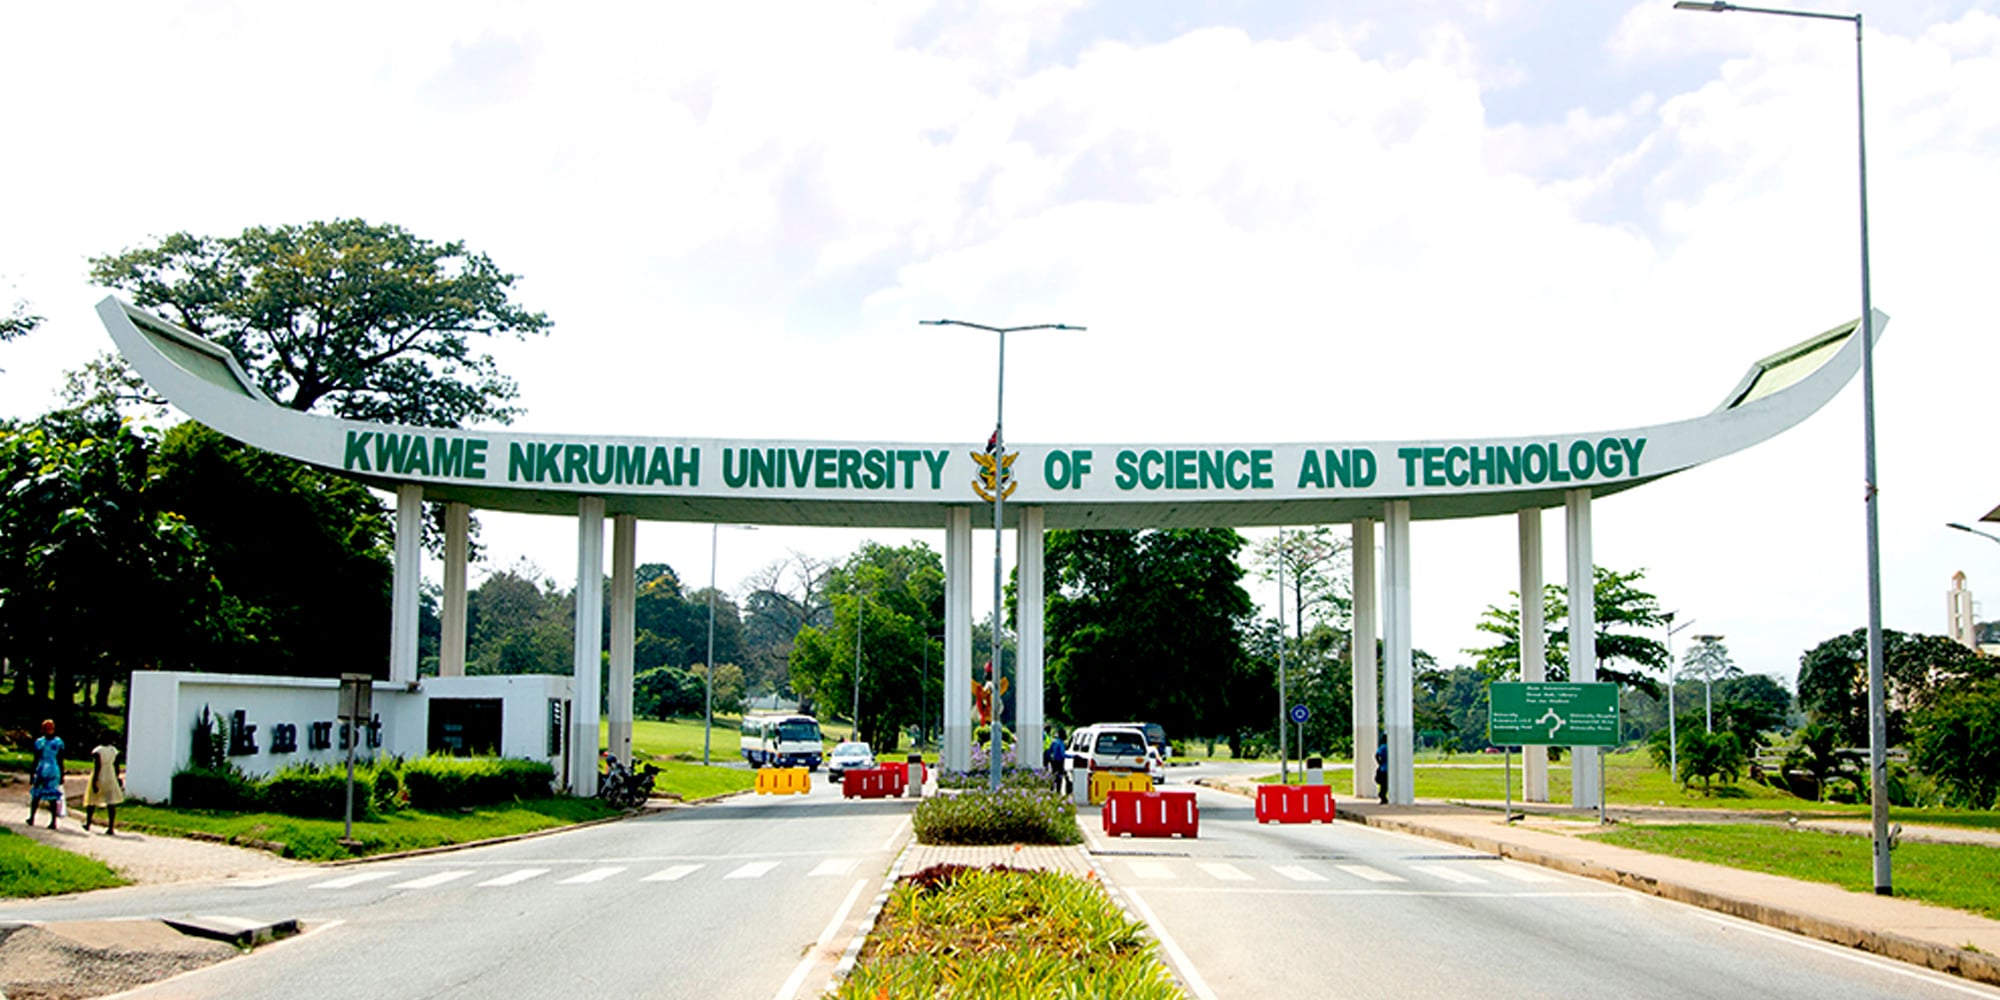 Auditor General’s report: Only 61 out of 360 programmes offered by KNUST accredited